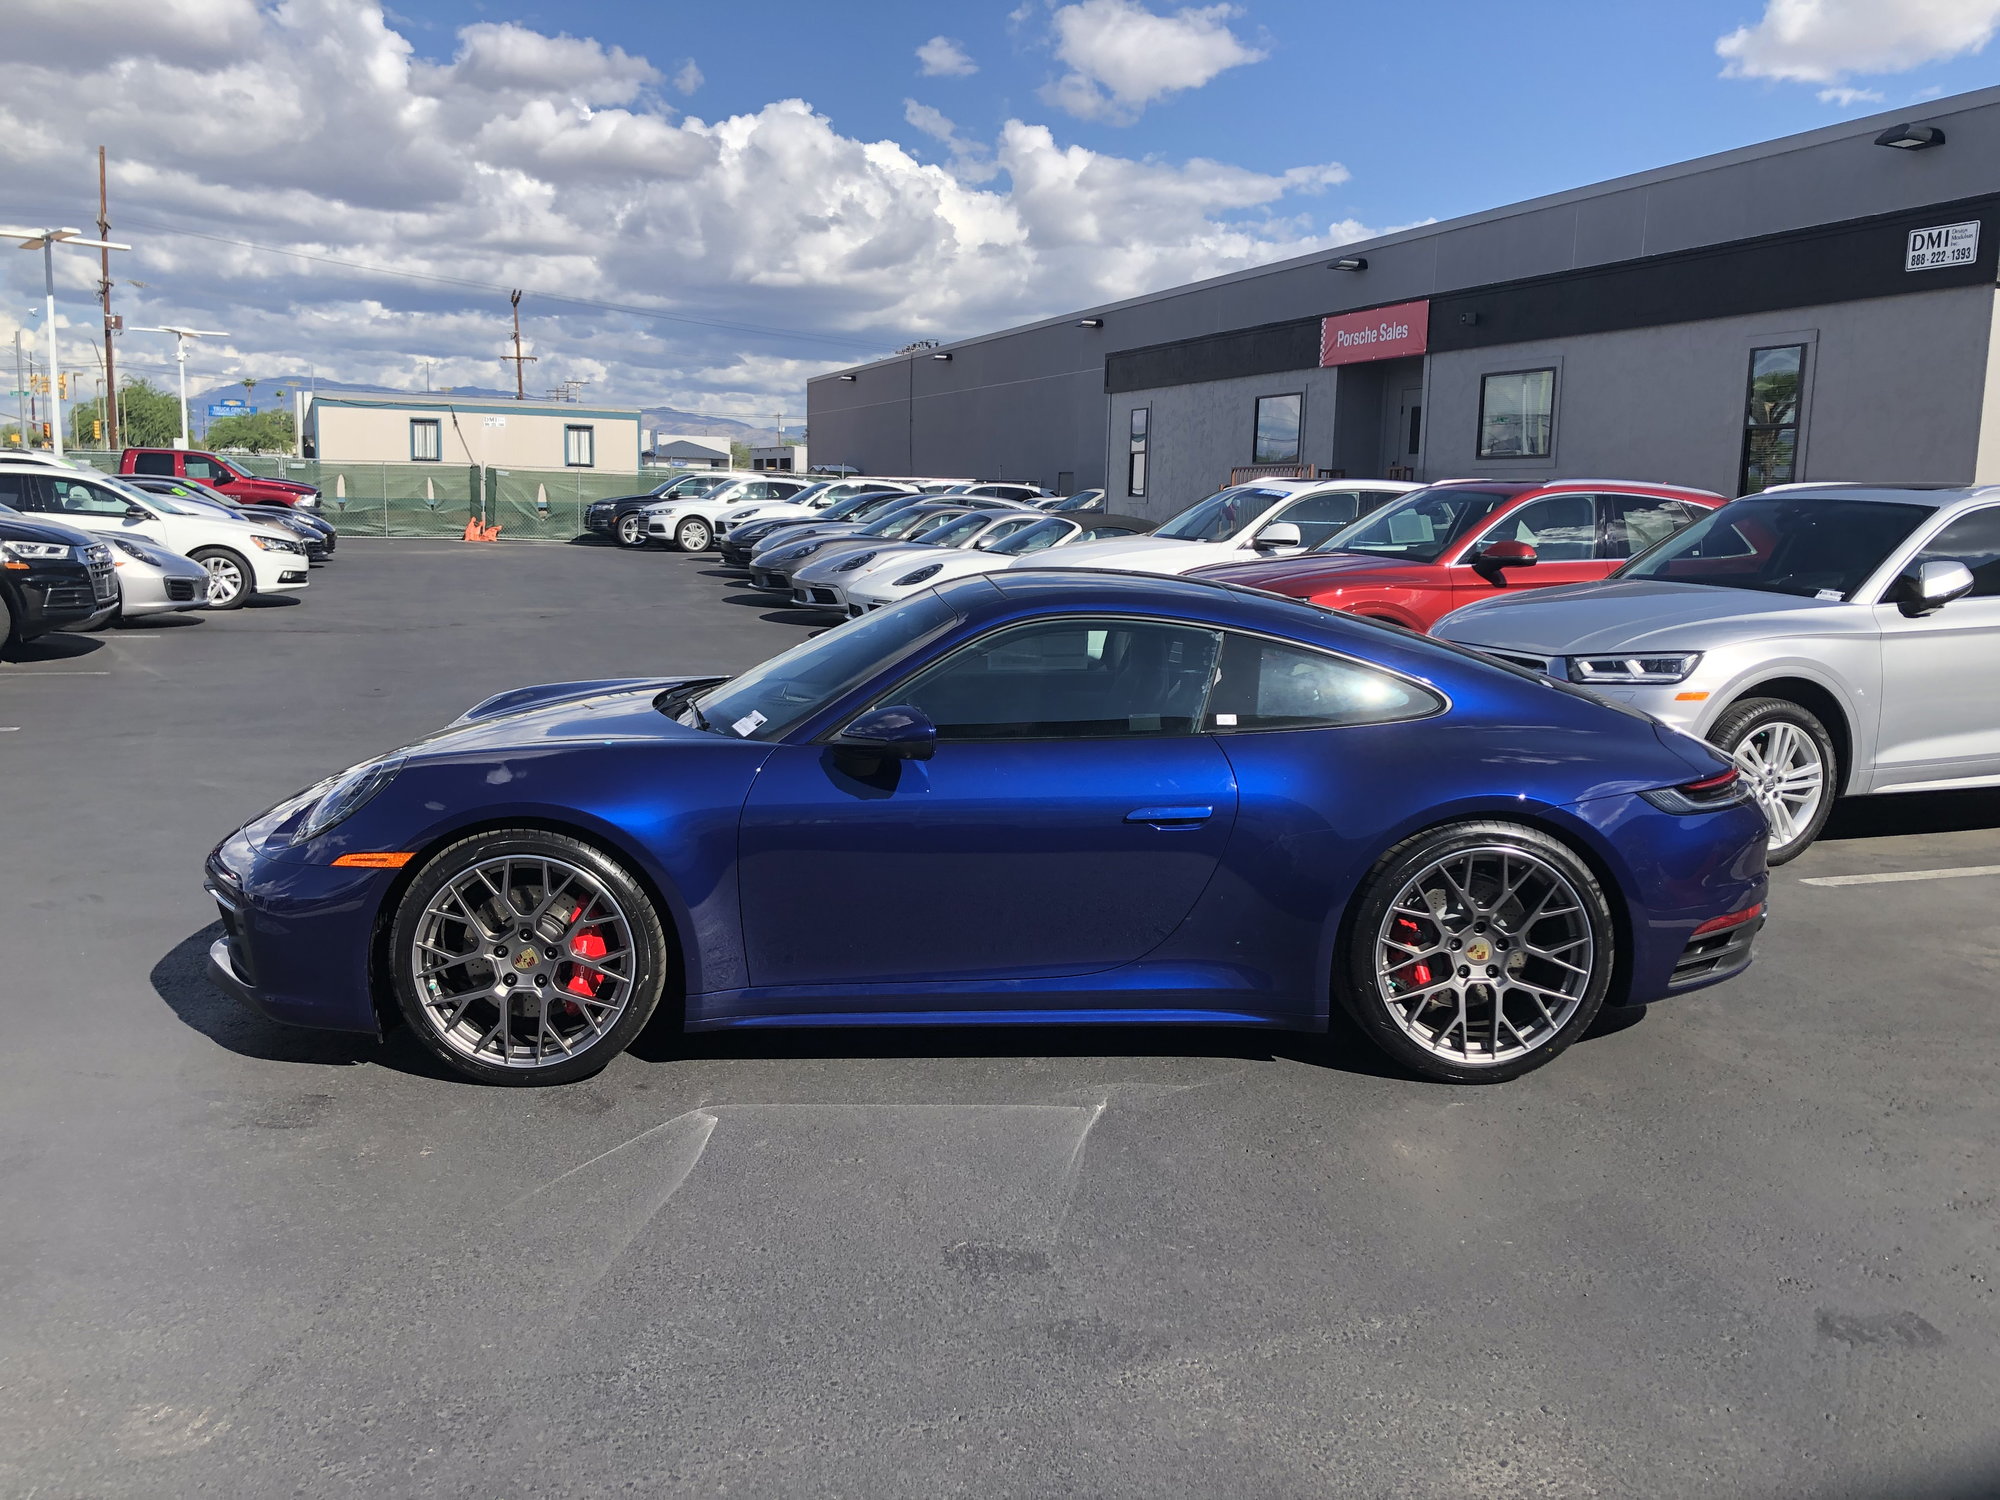 2019 Porsche GT3 - 2020 Gentian Blue 992 911 4S Available For Immediate Delivery! - New - VIN WP0AB2A98LS226321 - 13 Miles - 6 cyl - AWD - Automatic - Coupe - Blue - Tucson, AZ 85711, United States